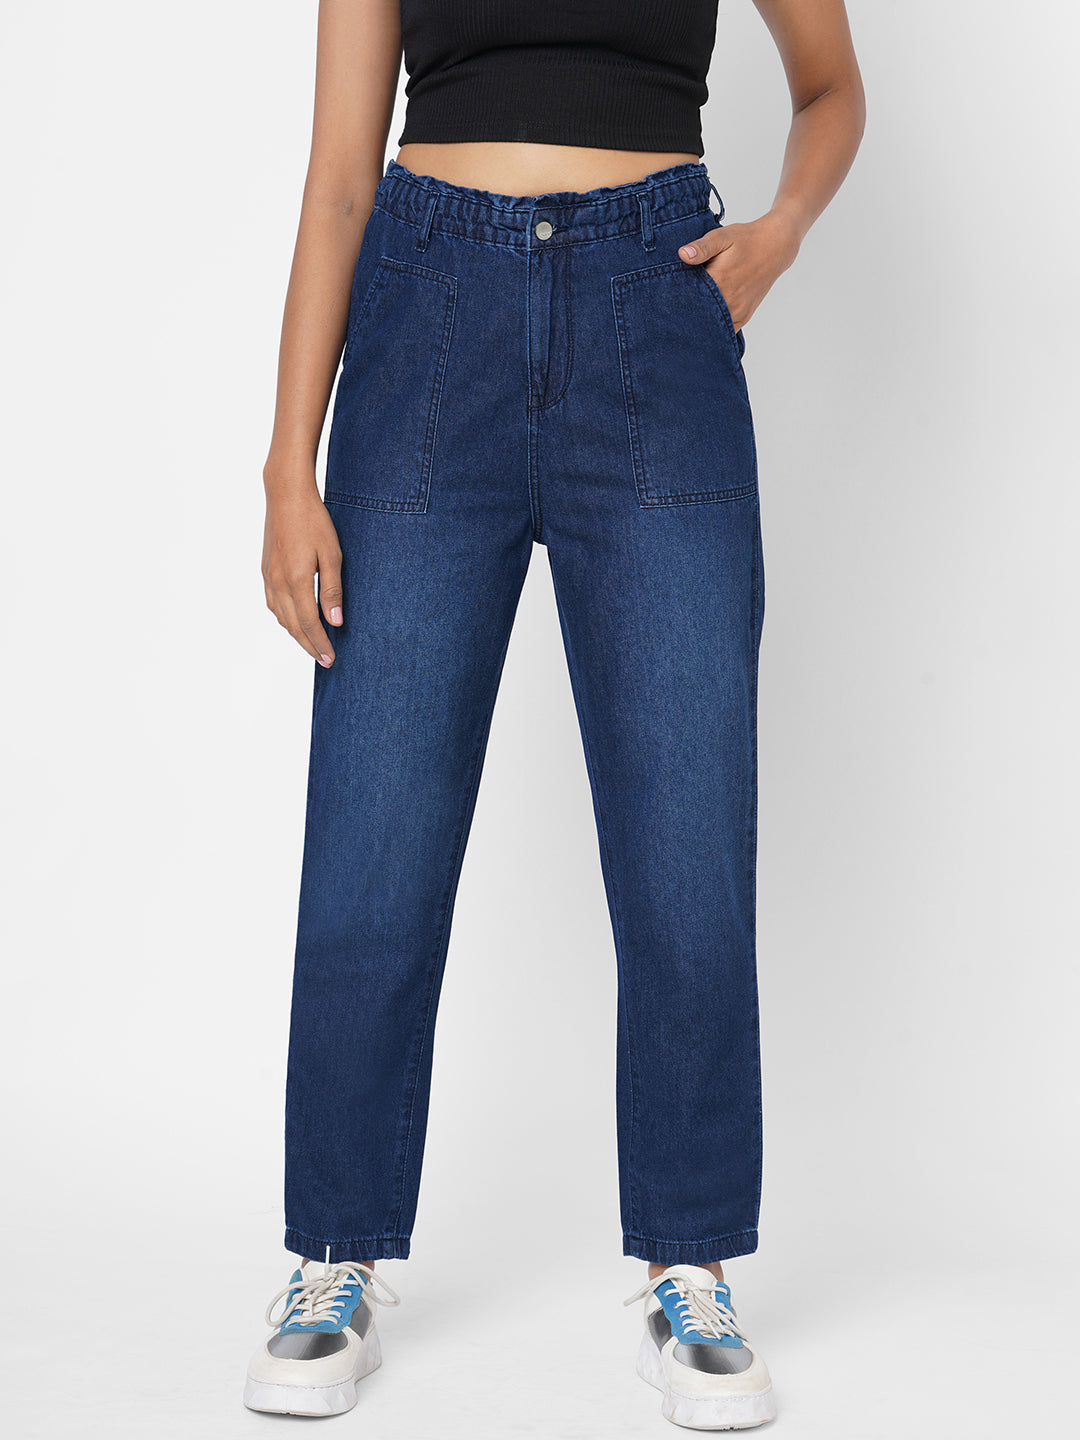 Buy Women High-Rise Baggy Fit Jeans